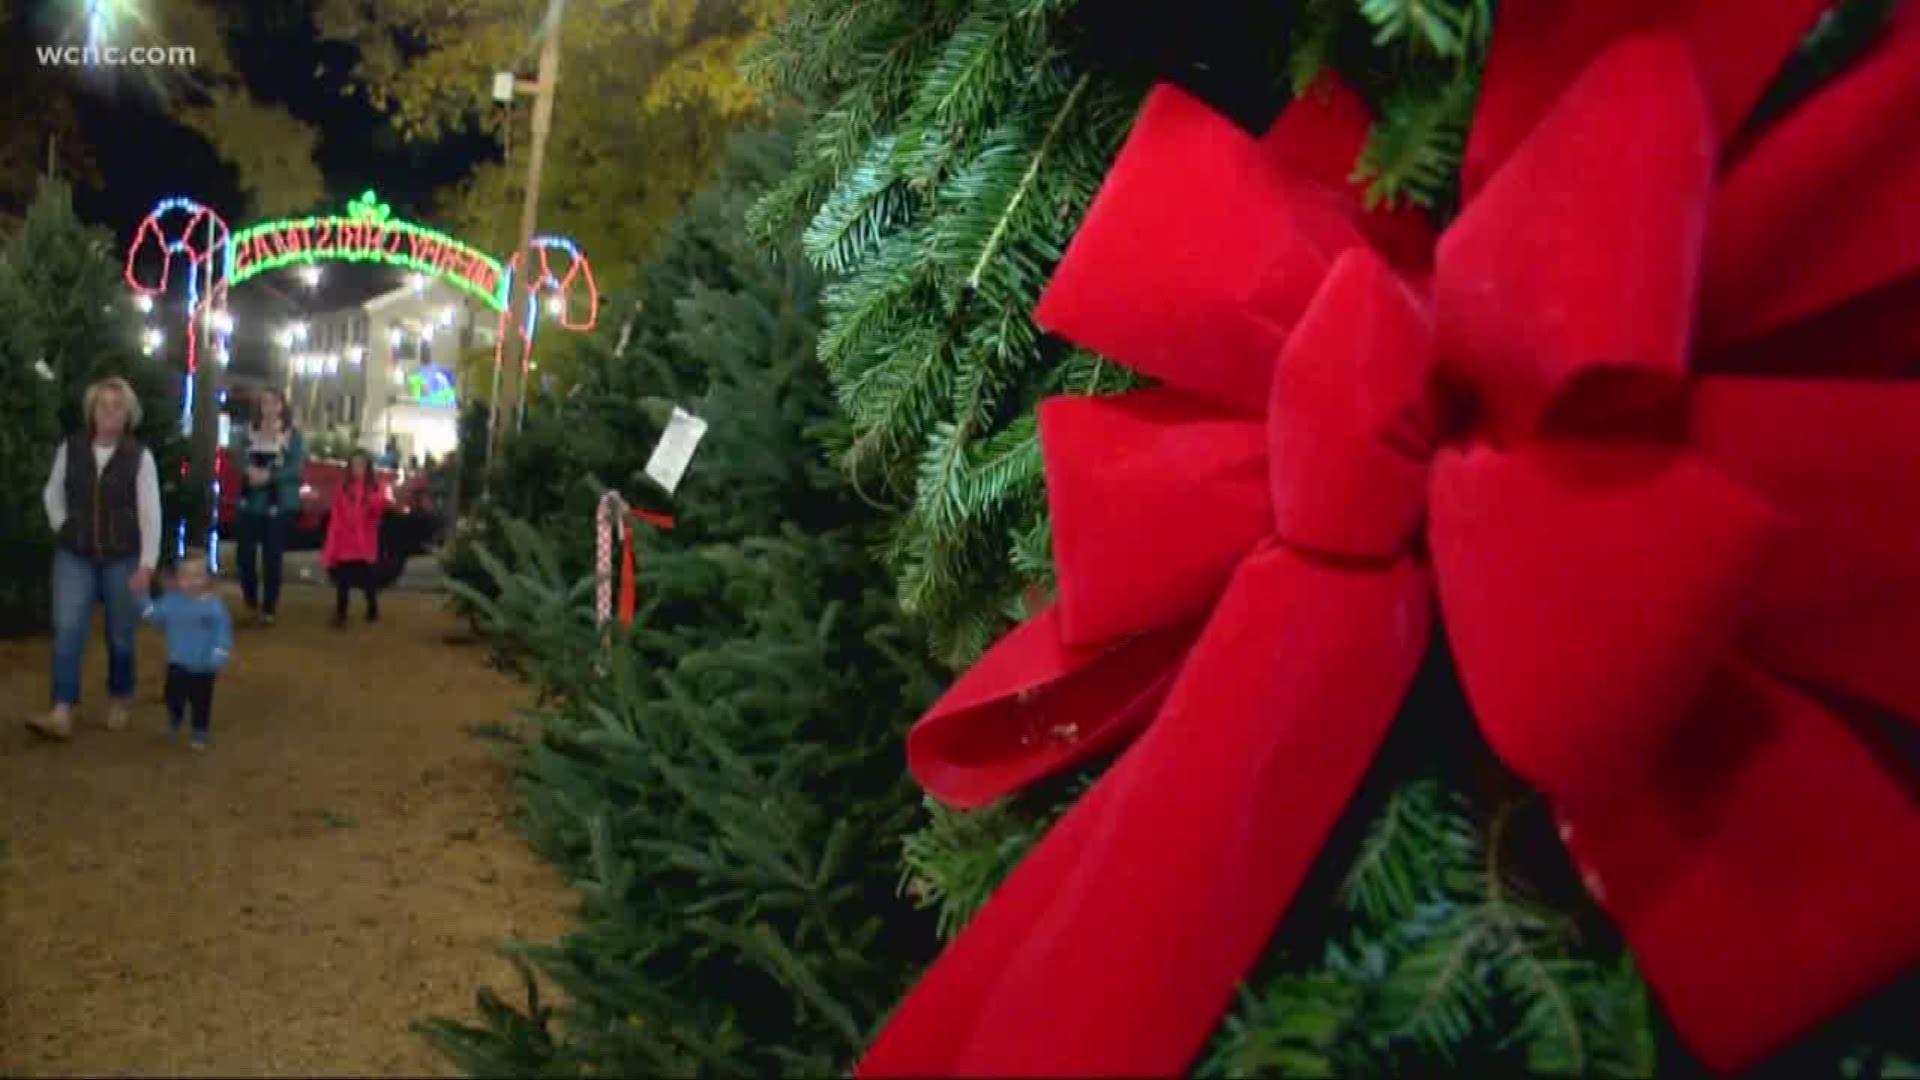 Customers may see about a 10 percent increase in the cost of trees this year.